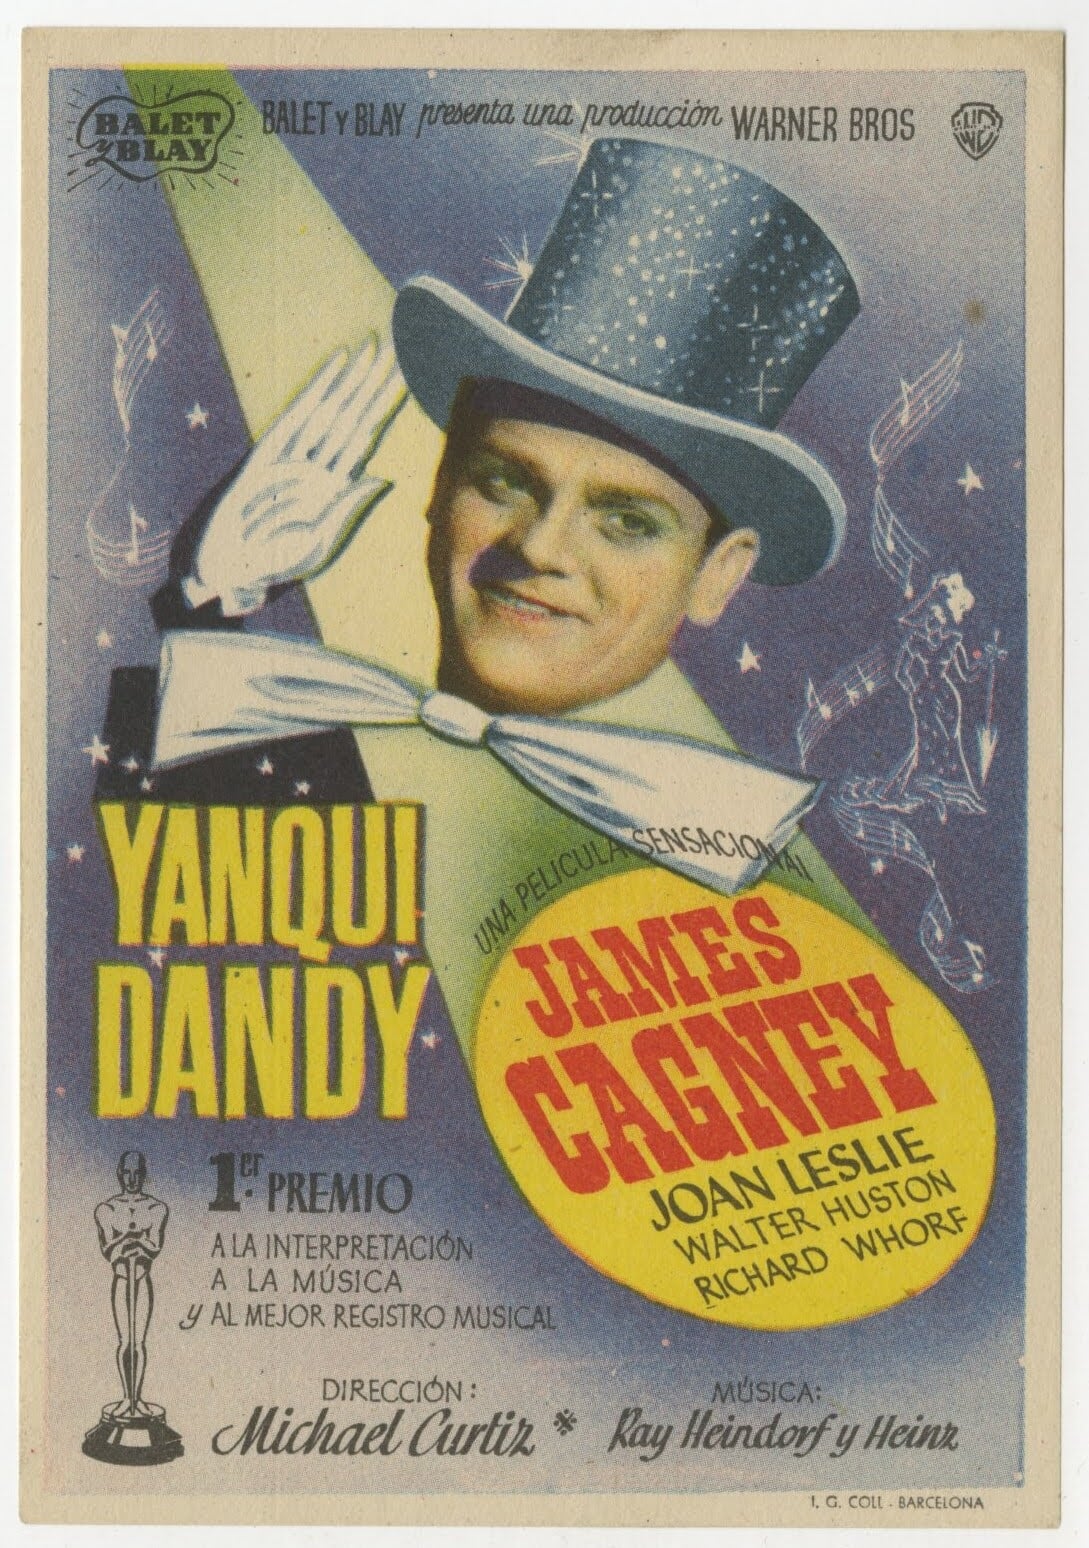 Yankee Doodle Dandy Spanish Herald (R 1945) - posterpalace.com